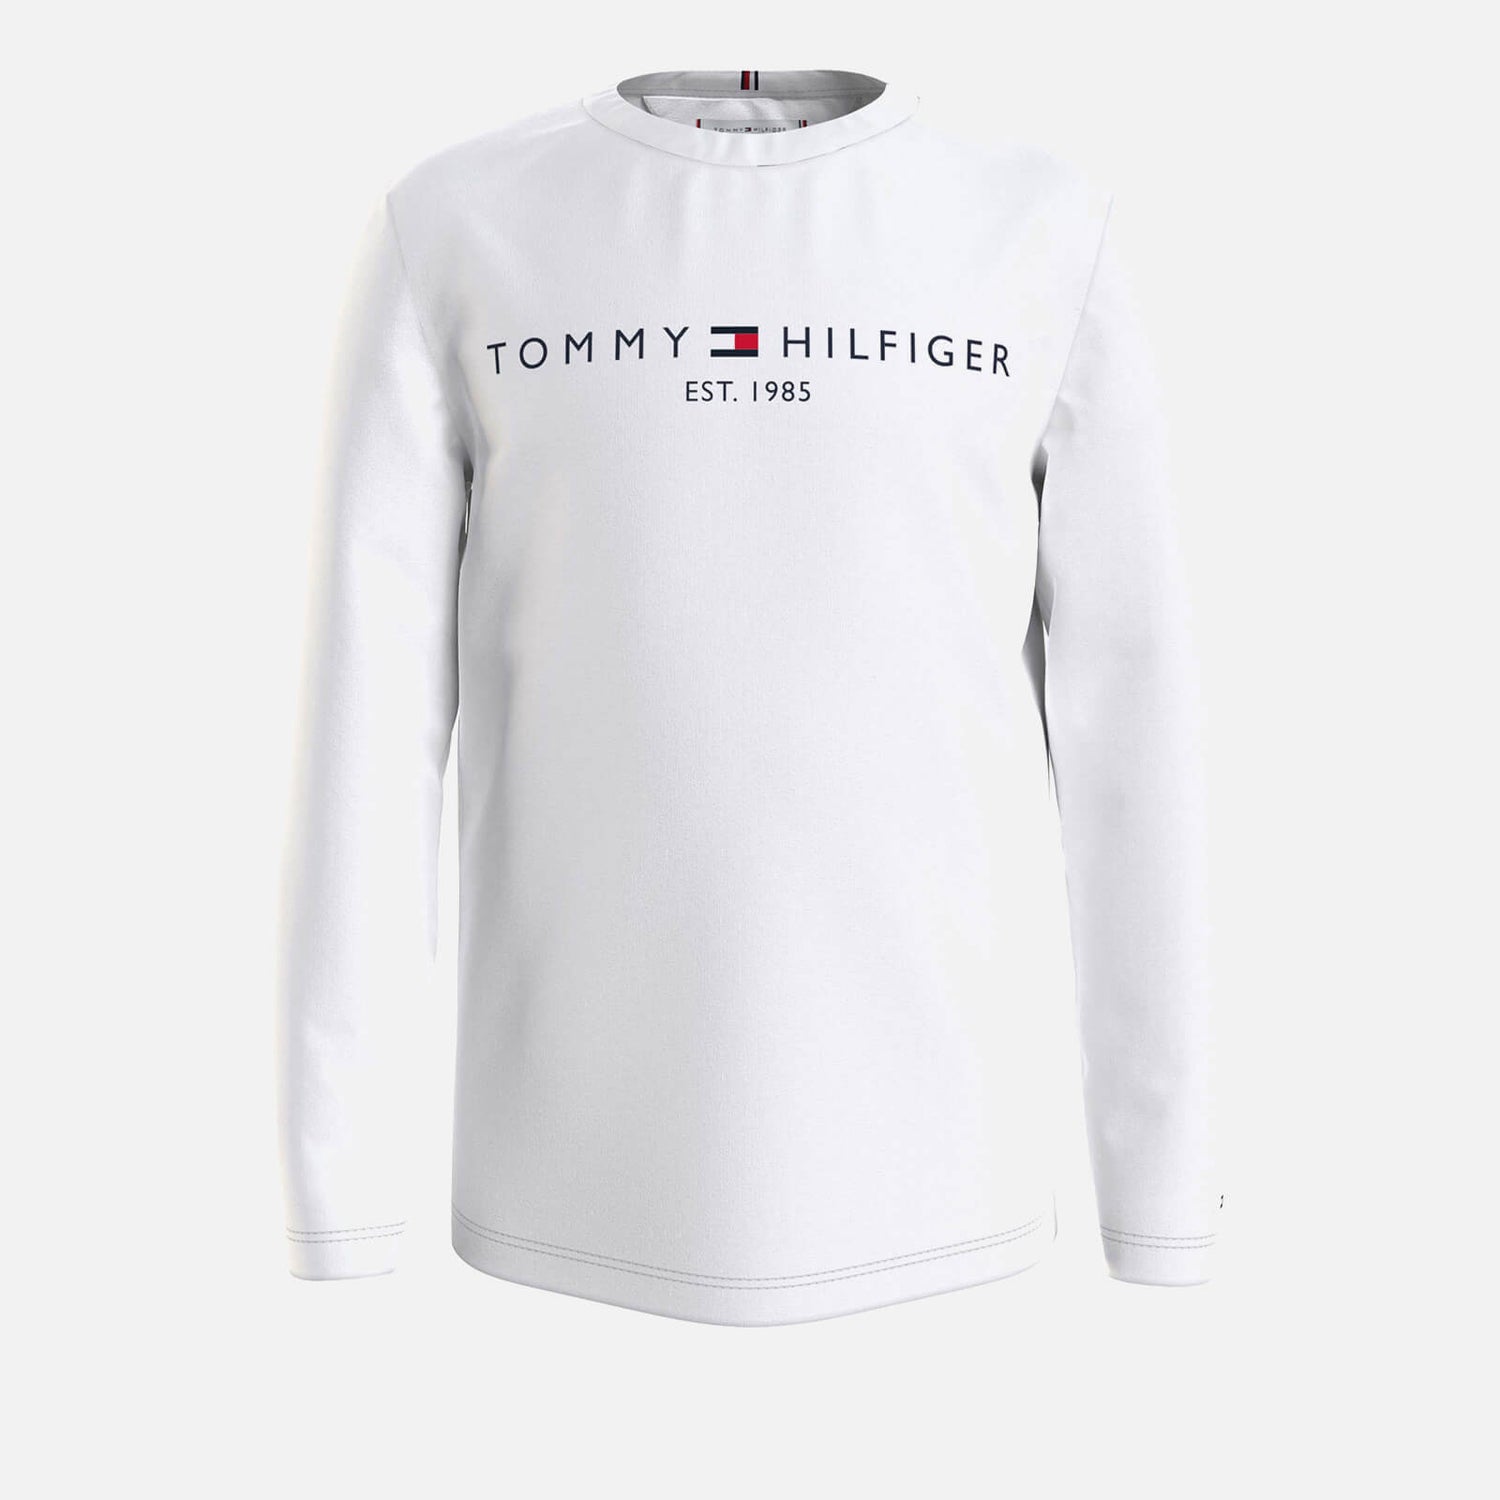 Tommy Hilfiger Boys' Essential T-Shirt - White - 12 Years